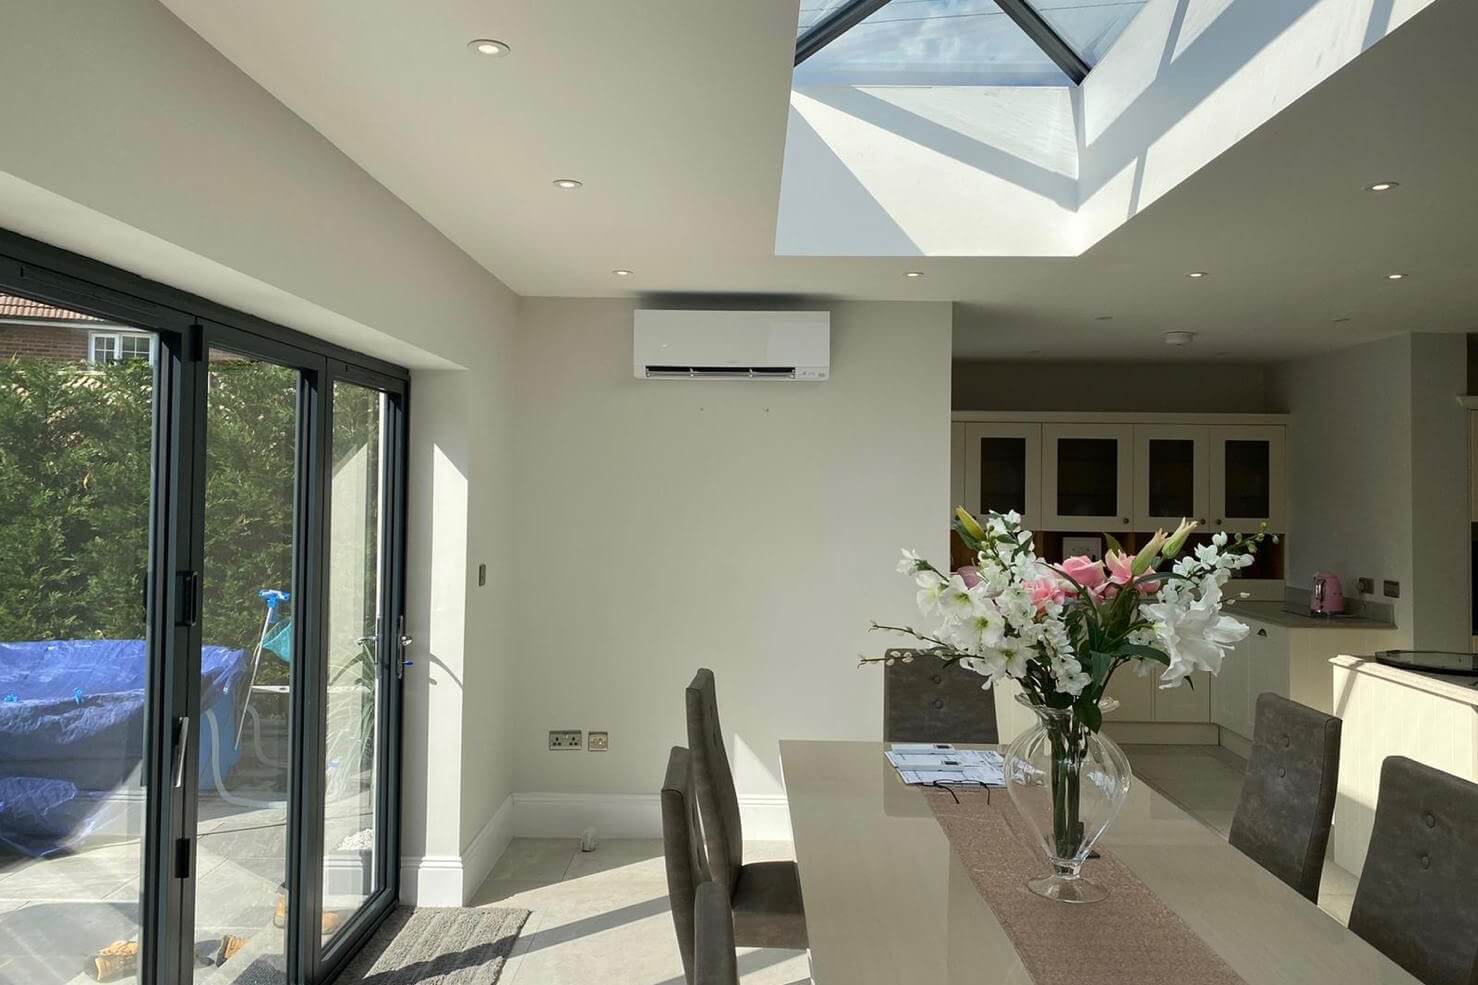 SubCoolFM wall mounted air conditioning in Staines kitchen living space extension showing end of extension by dining area and windows